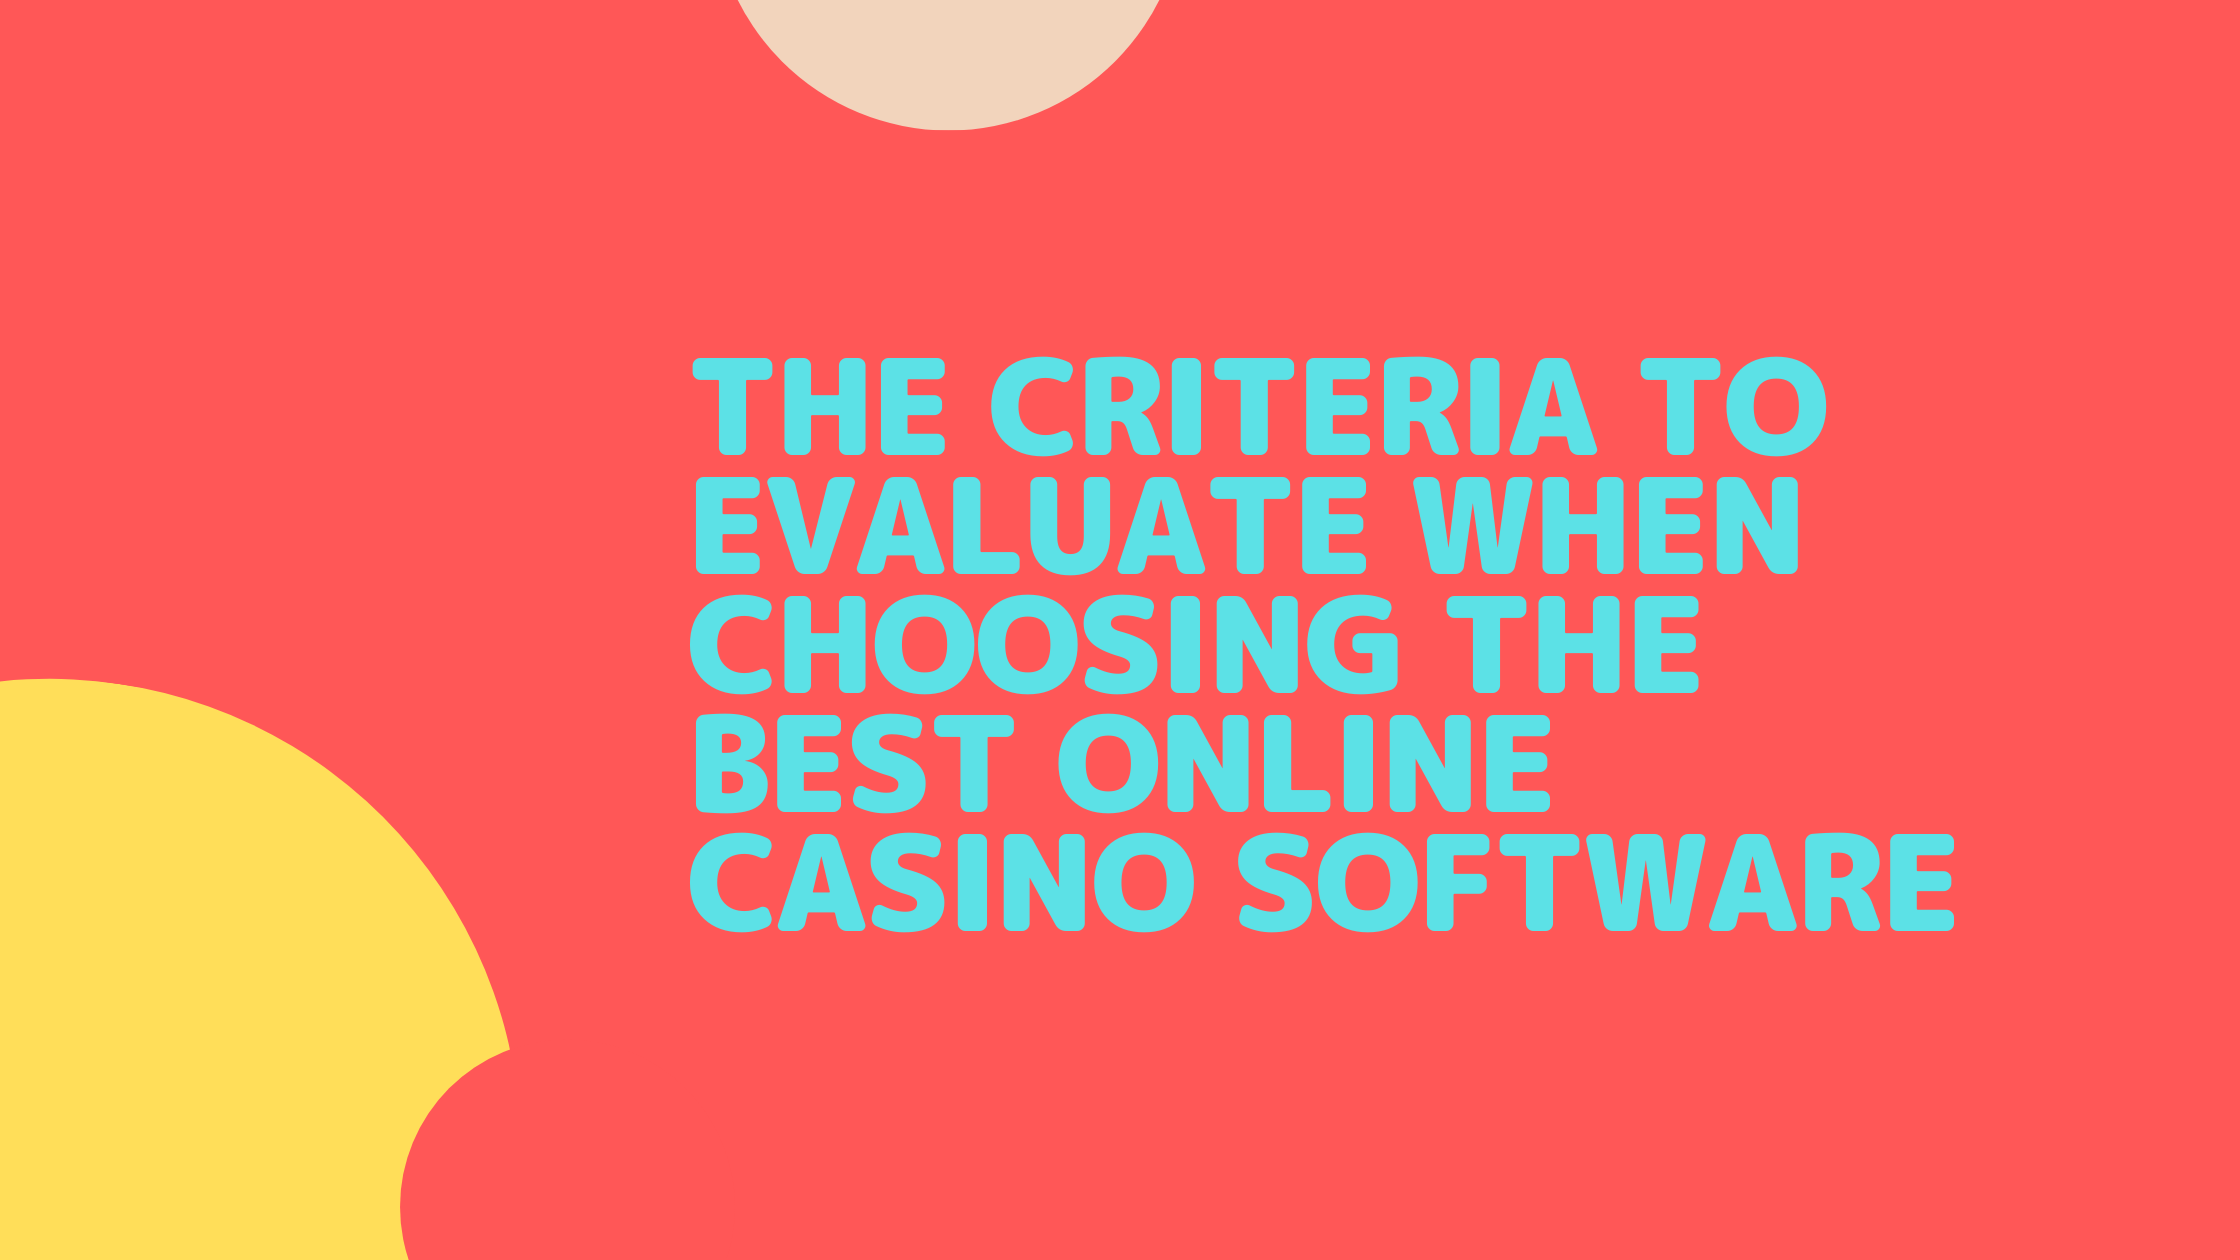 The Criteria to Evaluate When Choosing the Best Online Casino Software